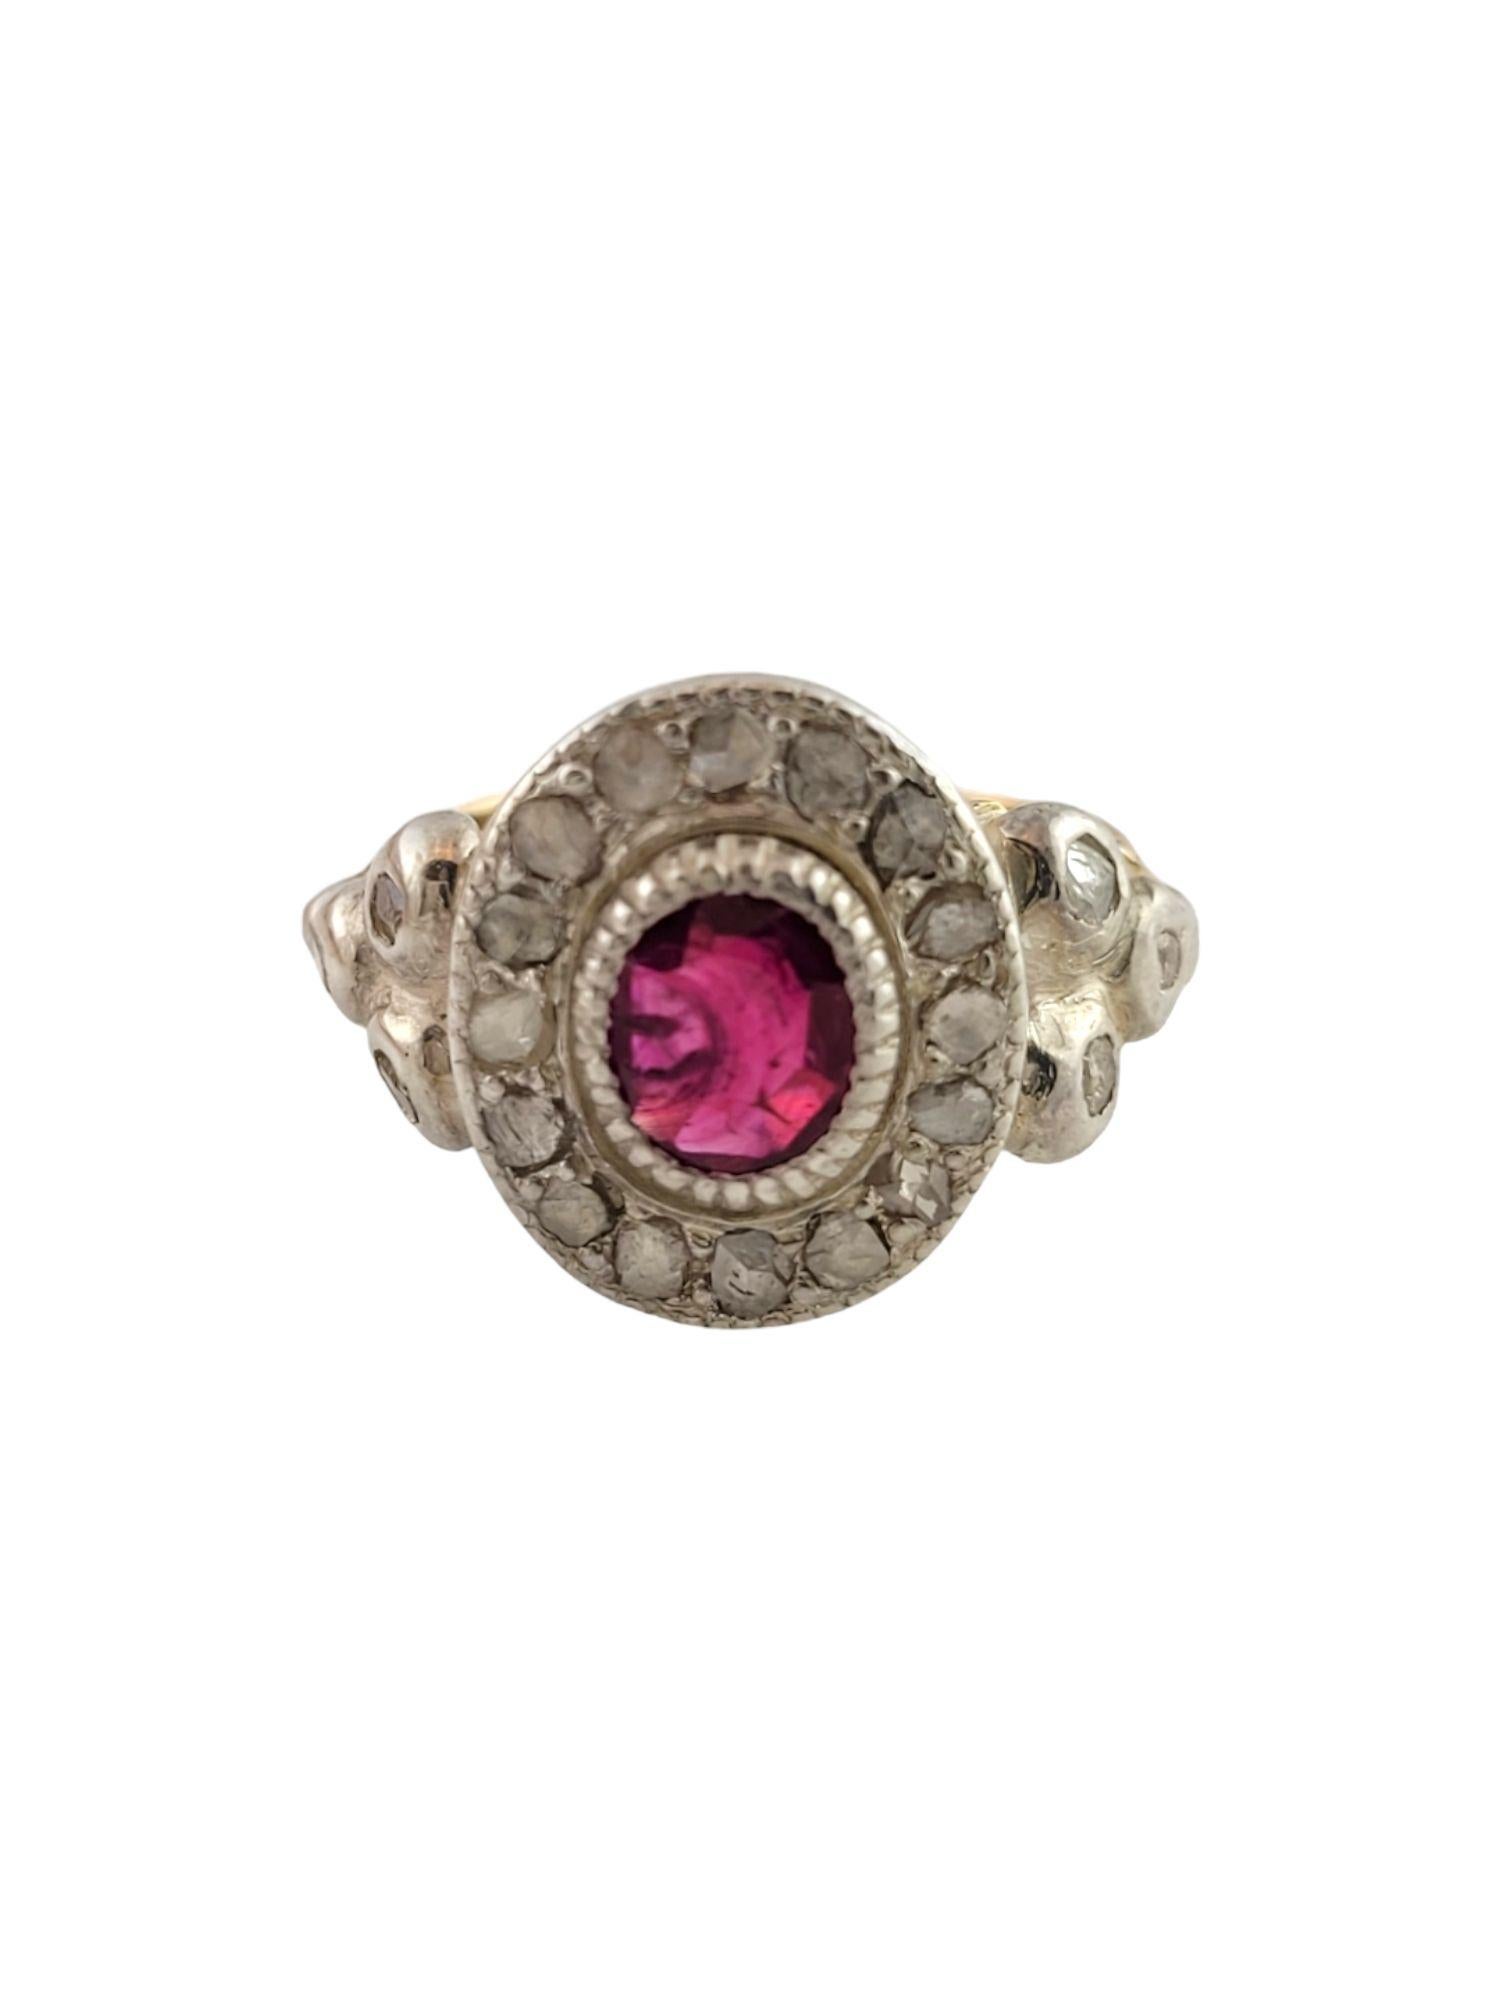 
 10K Yellow Gold Rose Cut Diamond and Lab Created Ruby Floral Ring Size 6.25

This striking ring dazzles with rose cut diamonds set in sterling silver. Platinum and white gold was not available in this time period, so sterling was used for the